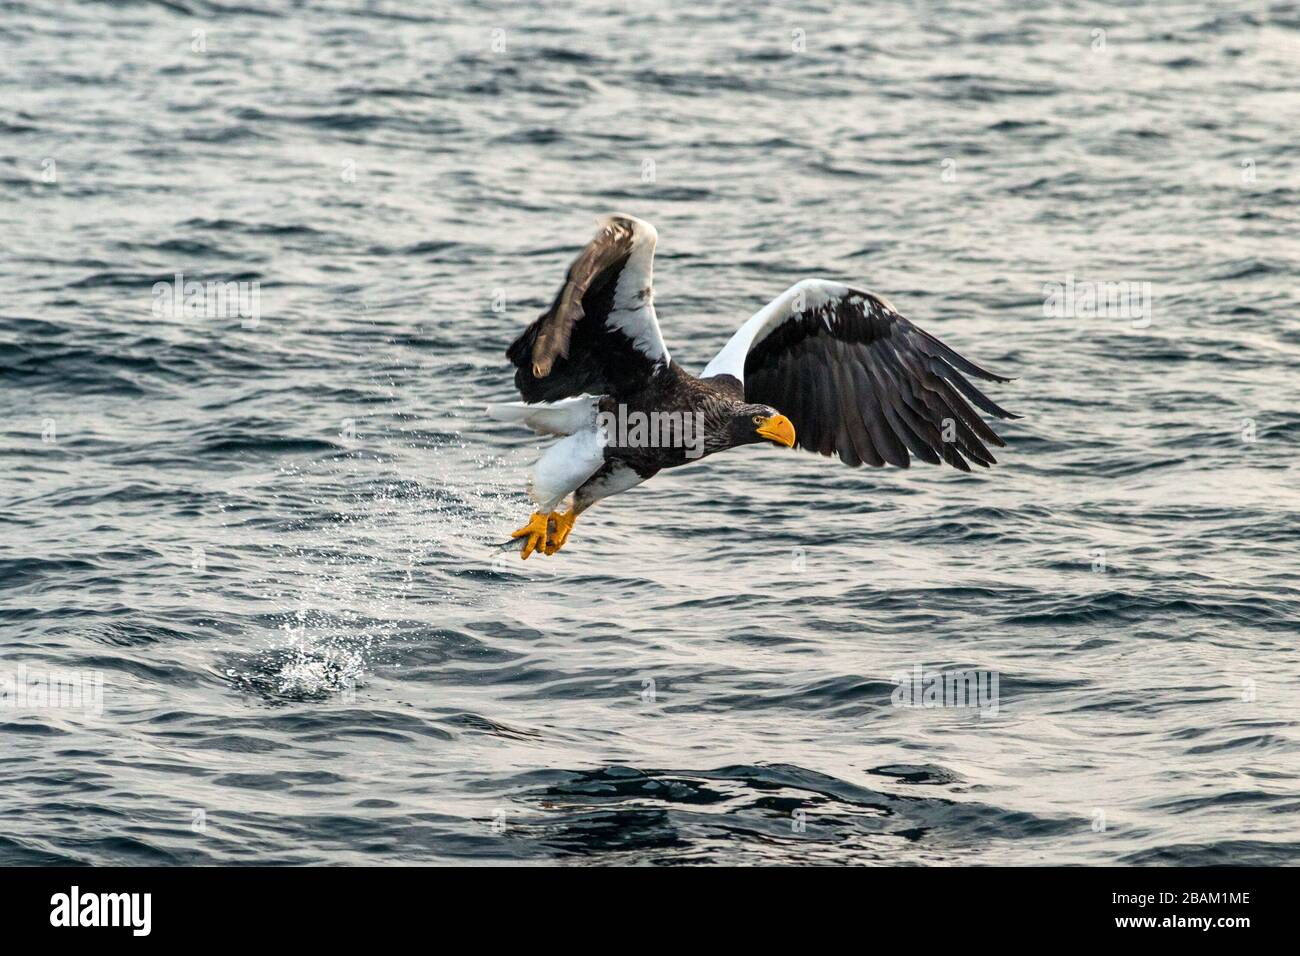 Steller's sea eagle  in flight, eagle with a fish which has been just plucked from the water in Hokkaido, Japan, eagle with a fish flies over a sea, m Stock Photo